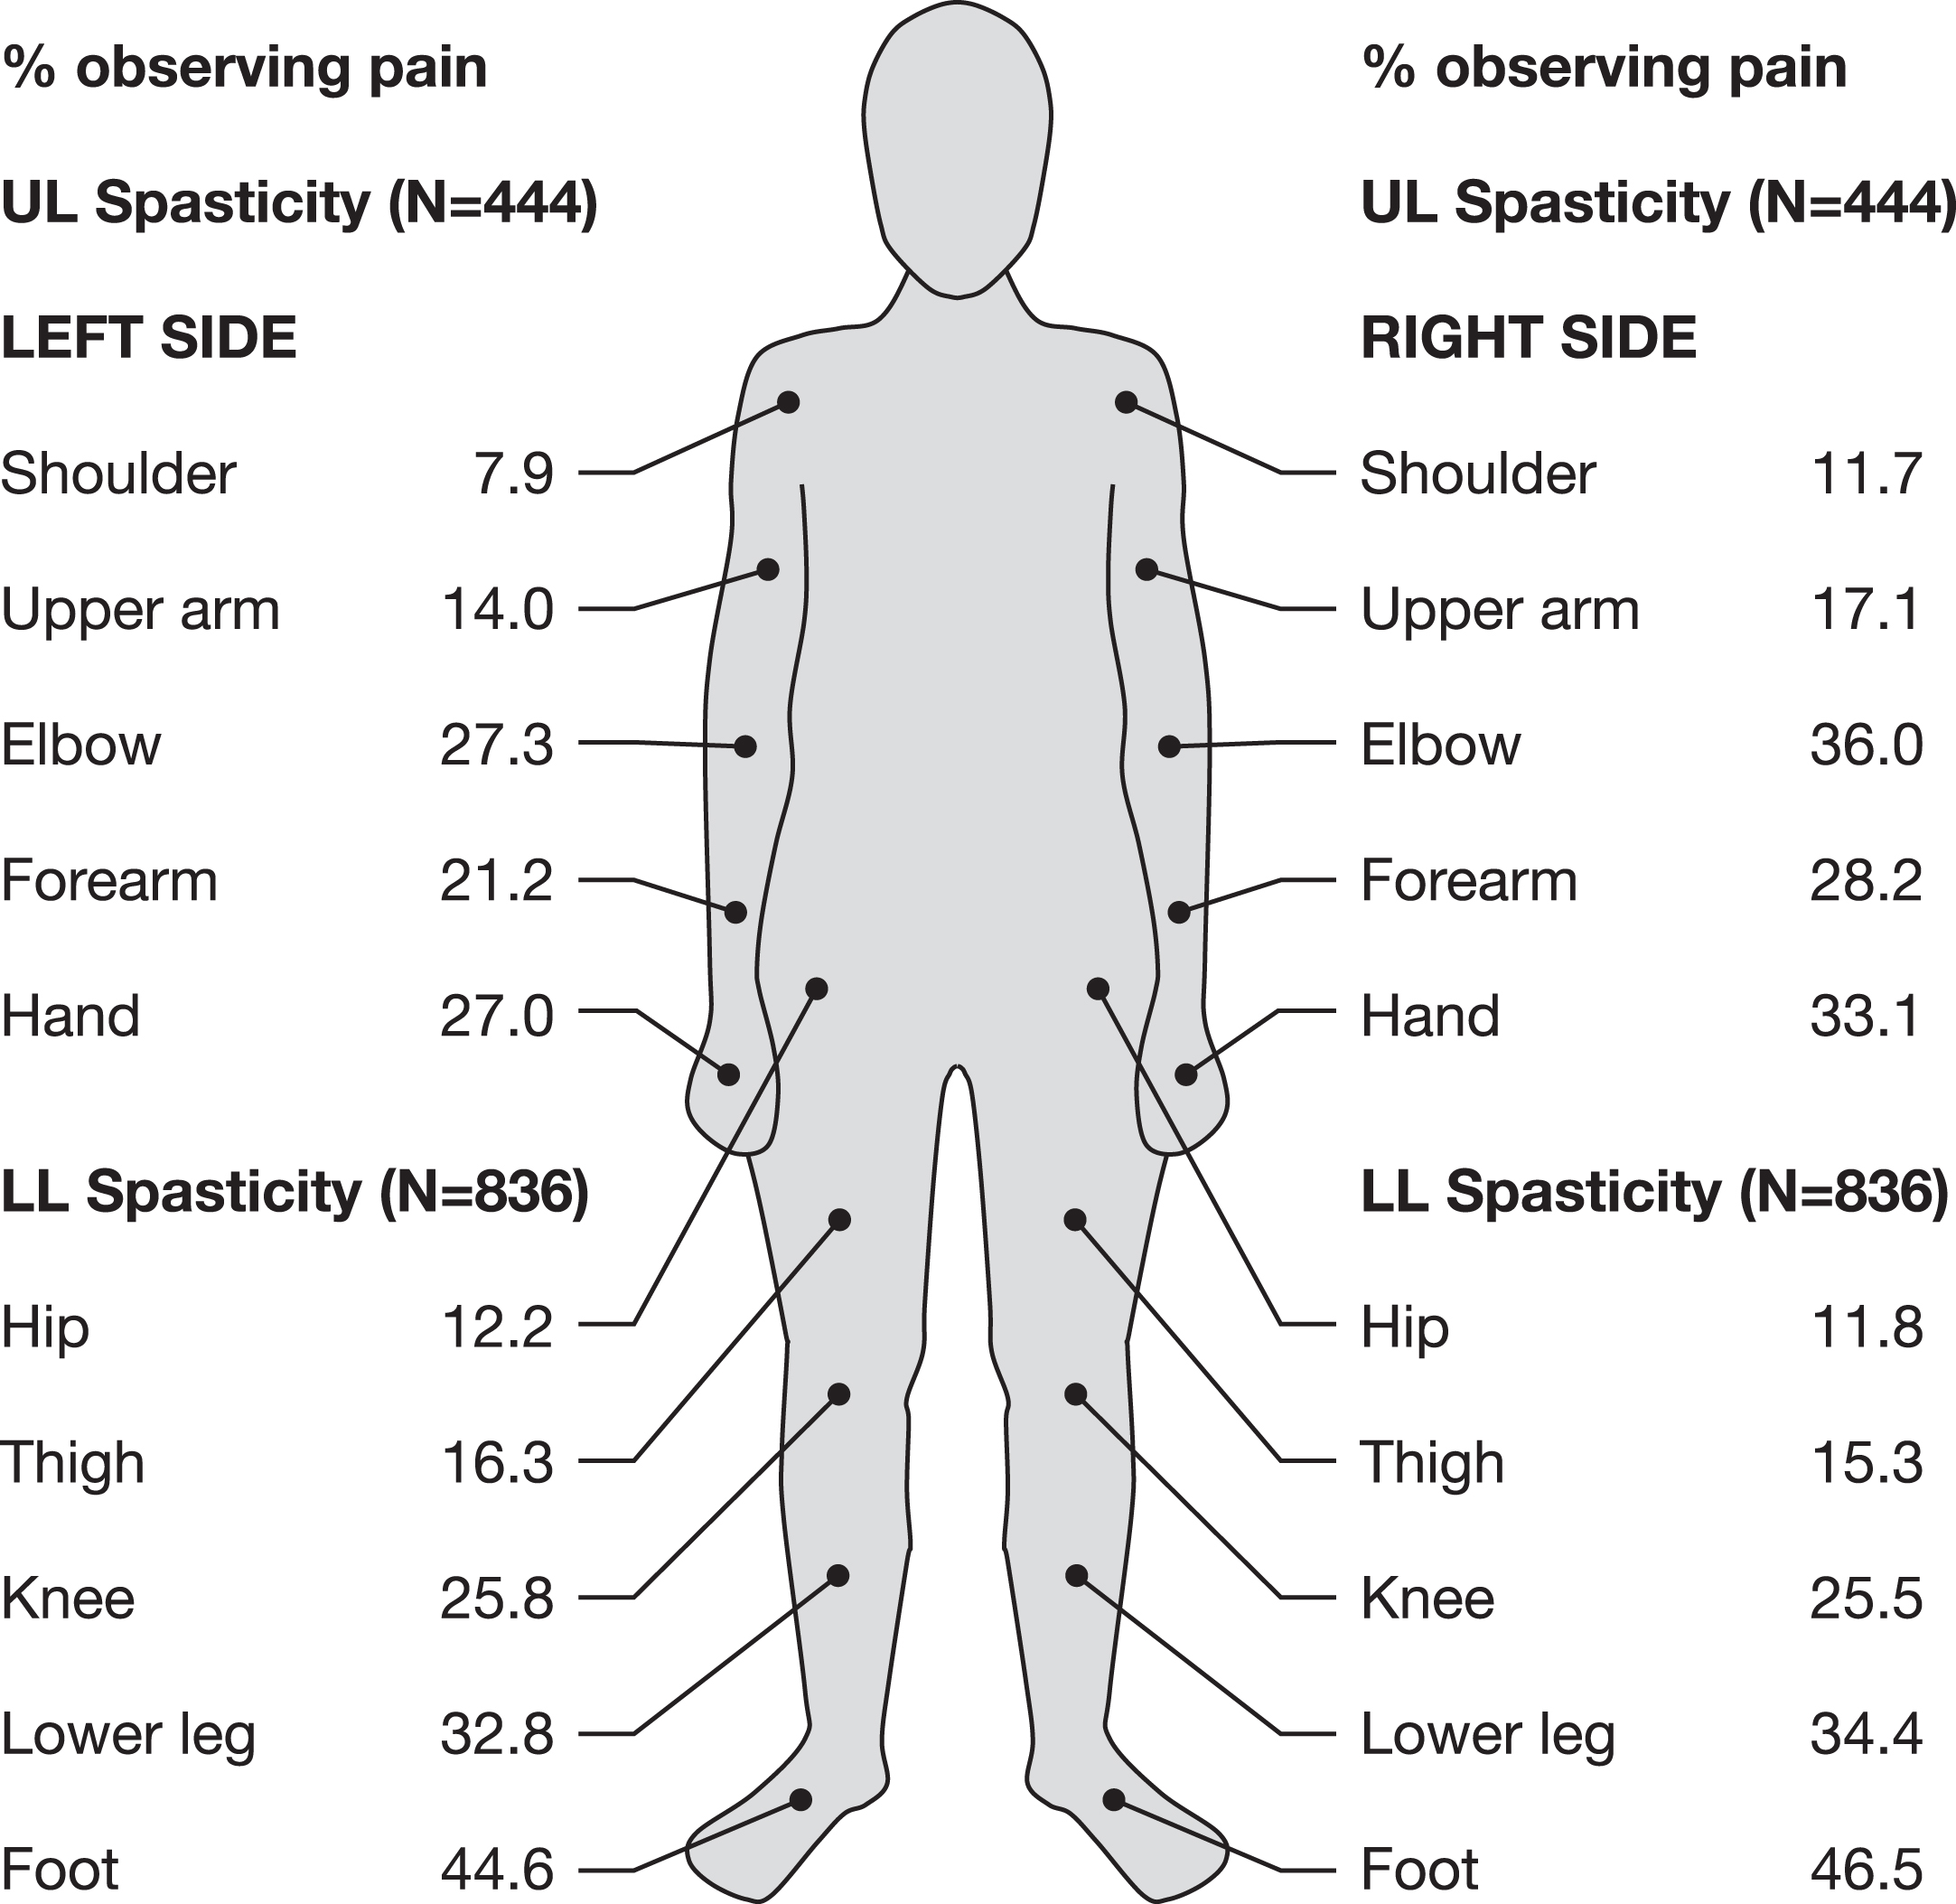 Location of SRP as observed by parents/caregivers (QPS Item 1 pain areas). An additional 1.0% and 1.4% of parents/caregivers observed pain in another LL or UL site, respectively, and 29.4% and 31.1% observed no LL or UL pain, respectively.LL = lower limb; QPS = Questionnaire on Pain caused by Spasticity; UL = upper limb.